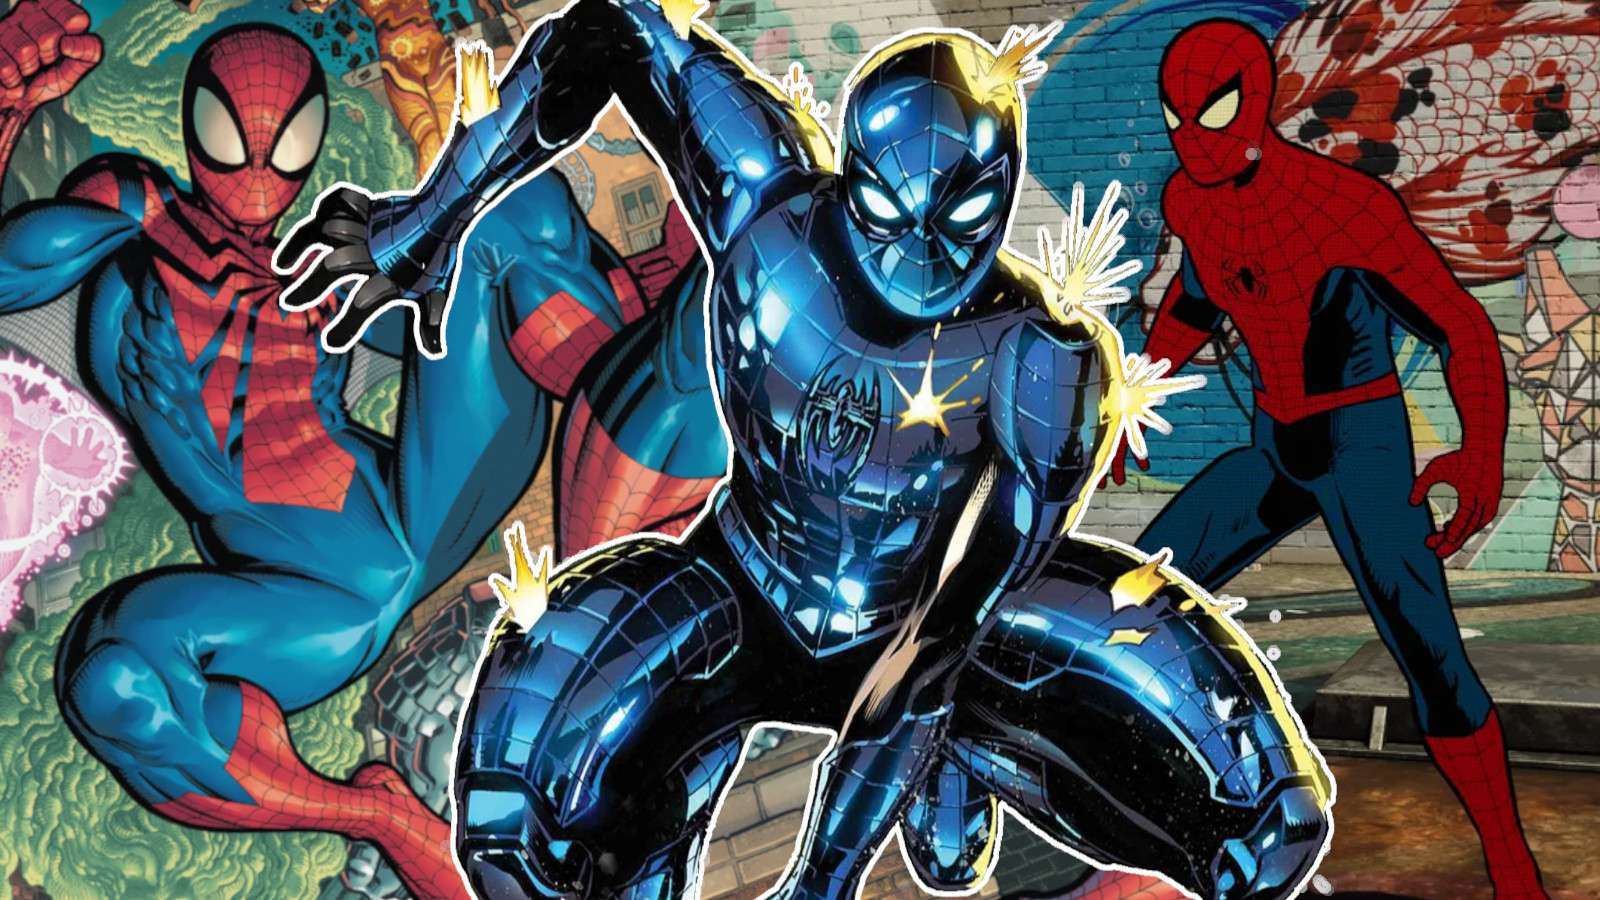 Spider-Man Beyond, Spider-Armor, and Animated Spider-Man costumes